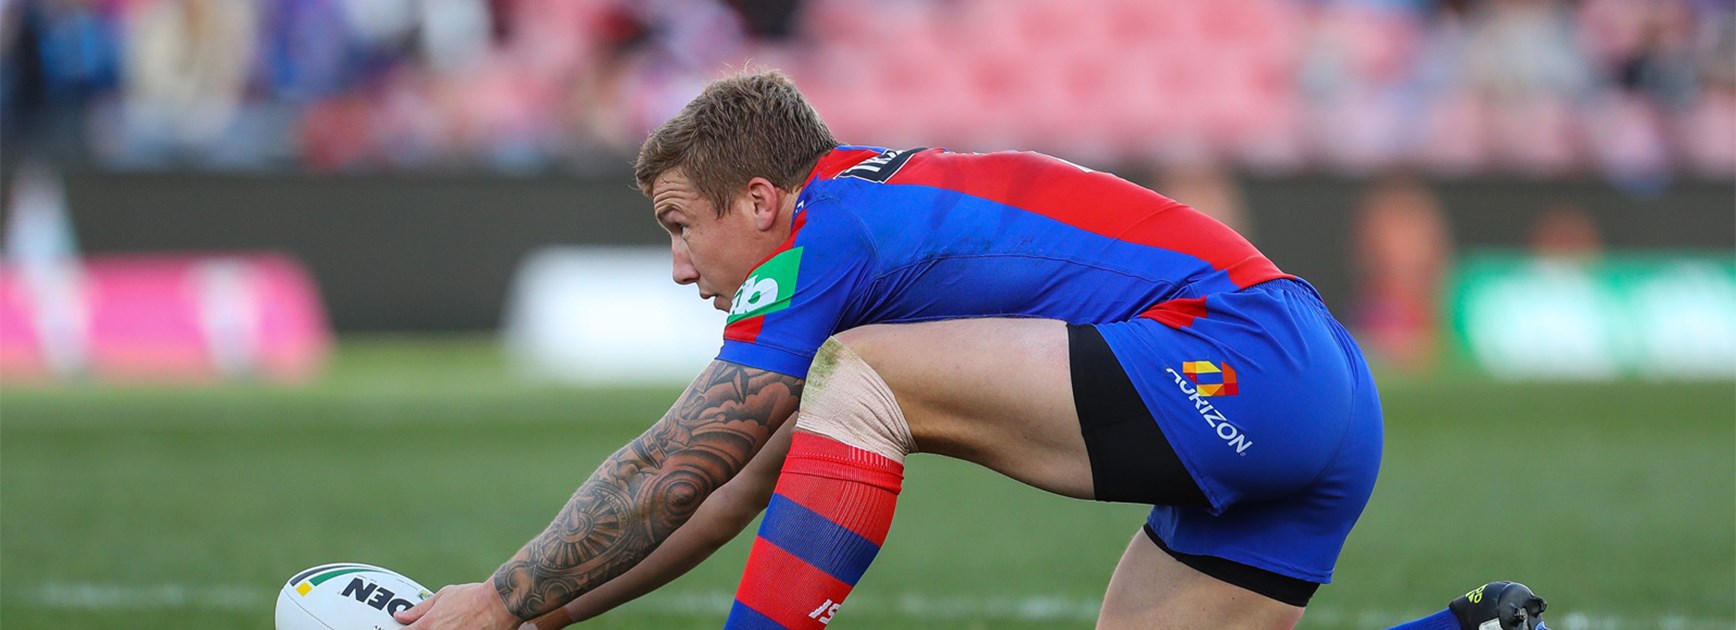 Knights halfback Trent Hodkinson lines up a shot at goal.